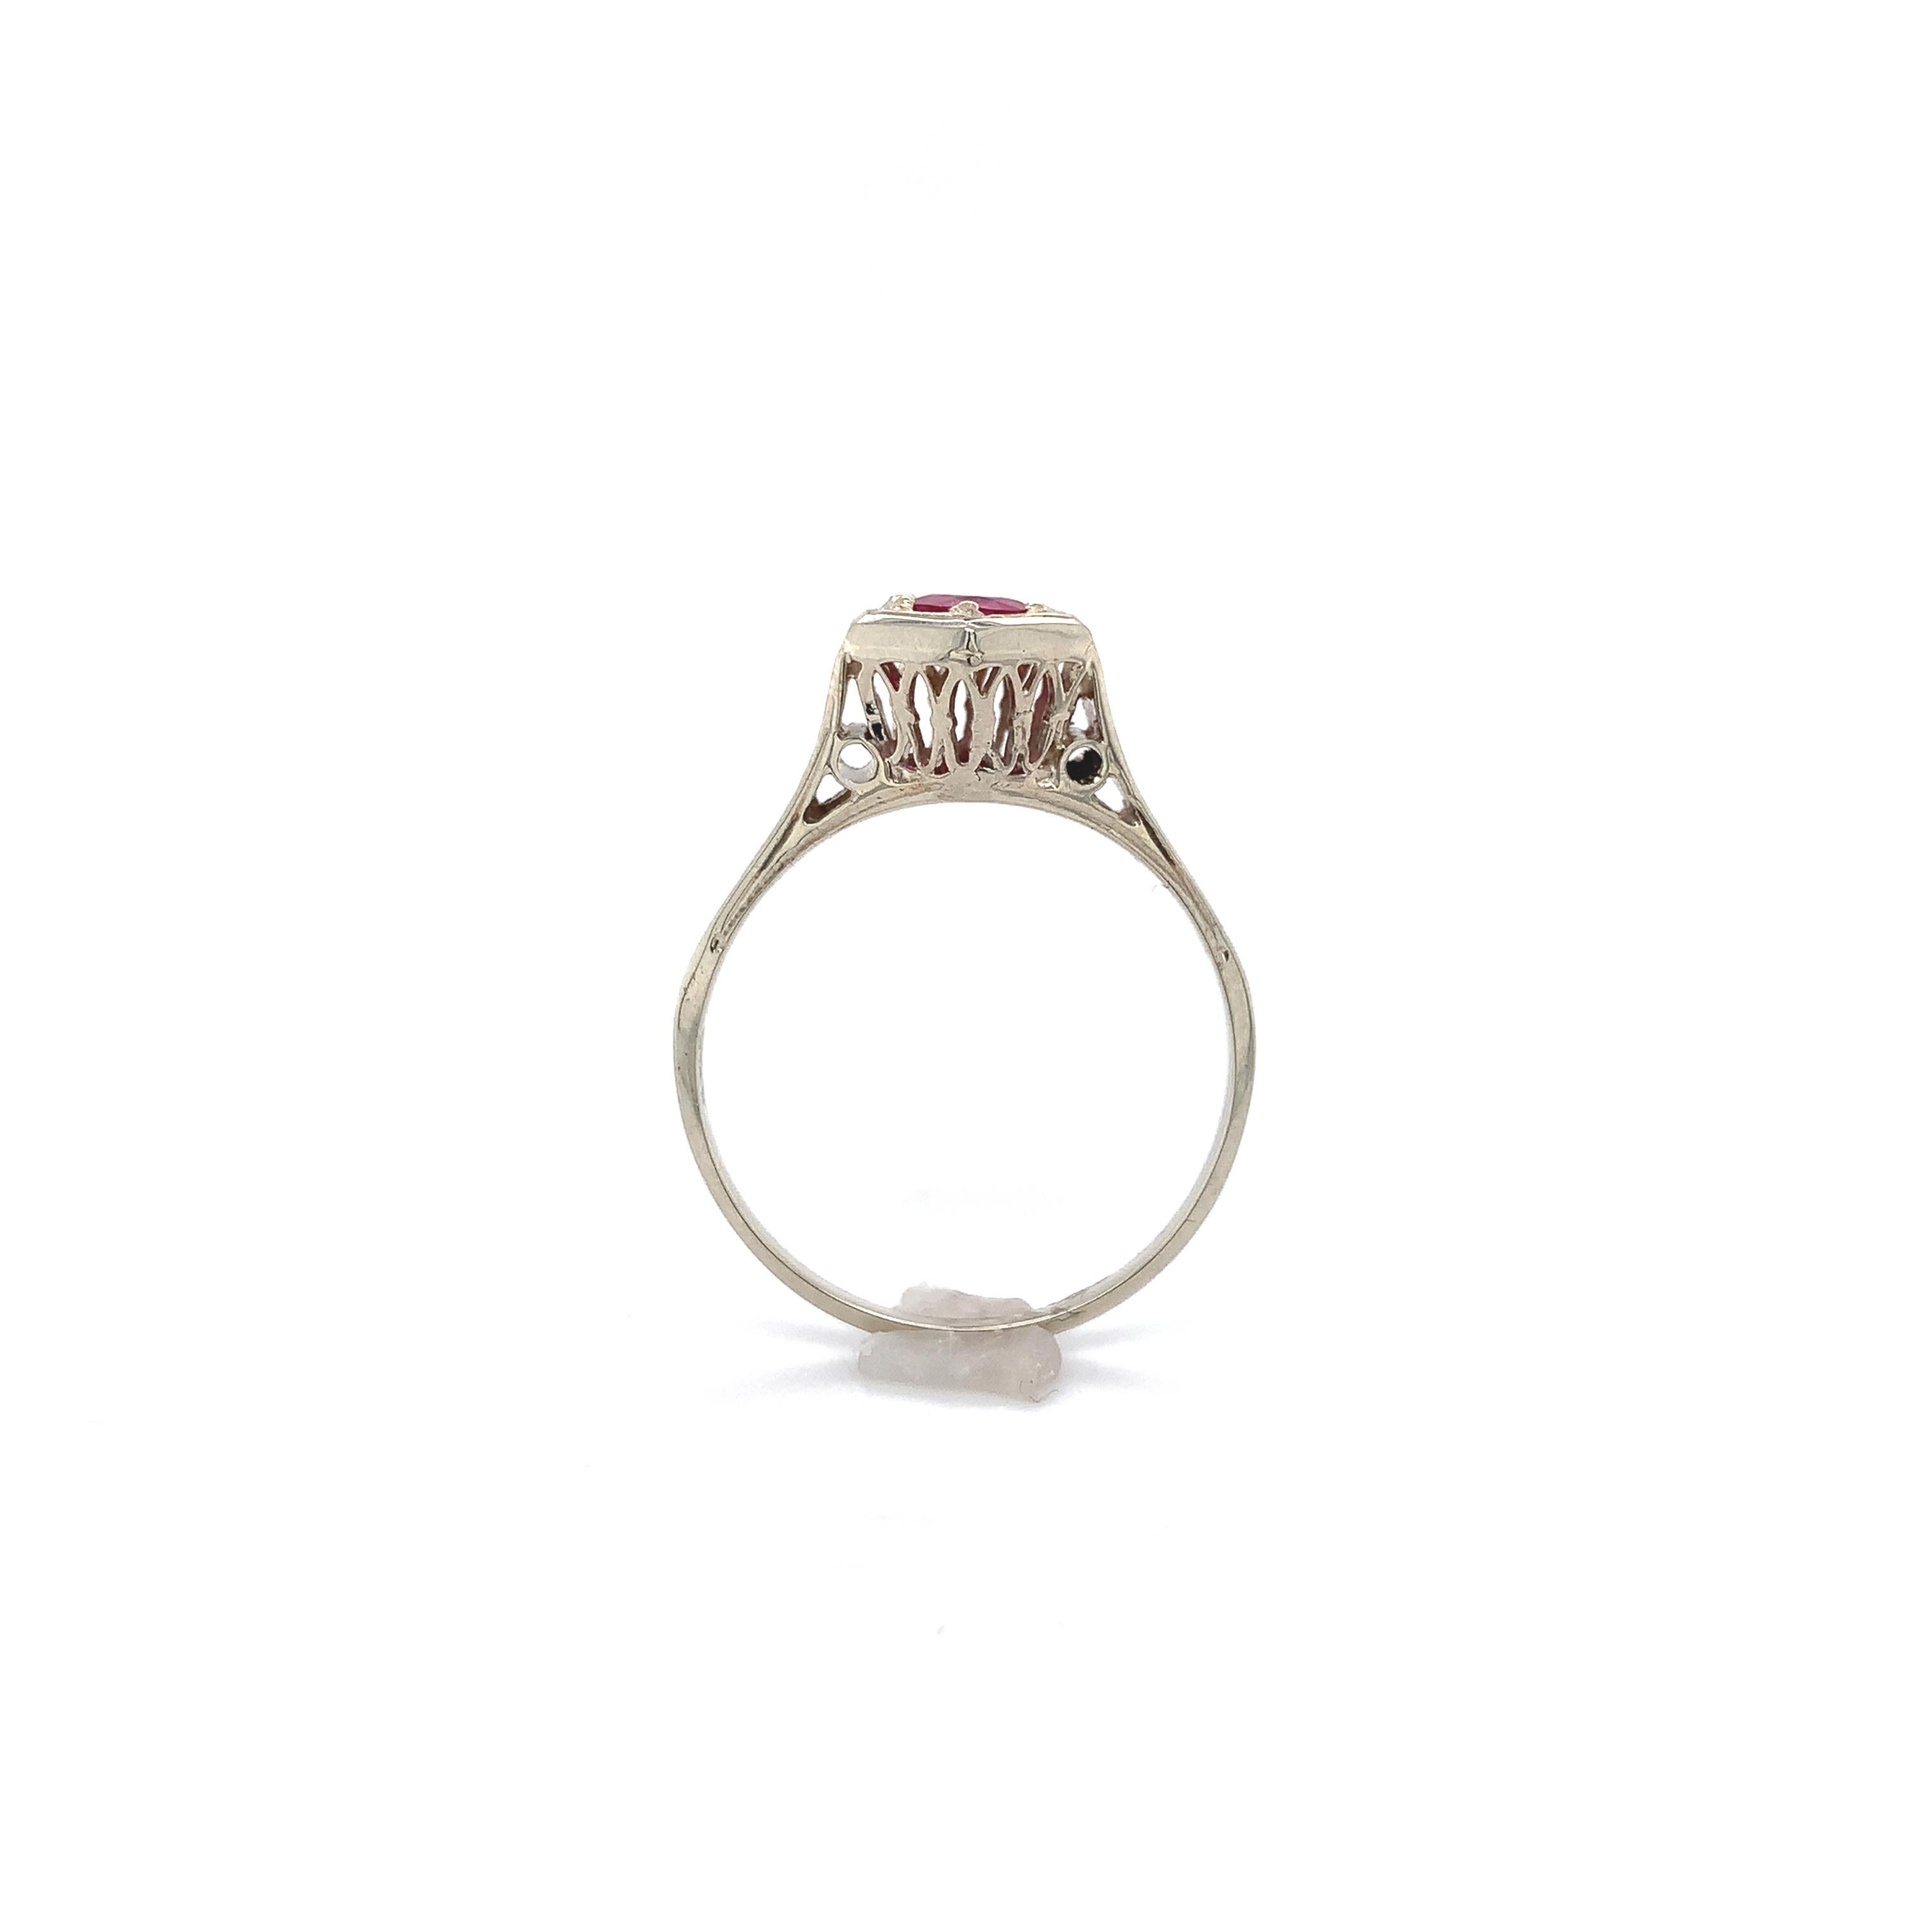 Art Deco 14K white gold filigree ruby ring. The ring features a genuine earth mined round pinkish-red ruby weighing .49cts. The ruby measures about 4.2mm and has all new bead prongs. There is hand engraving on the sides. The ring fits a size 7